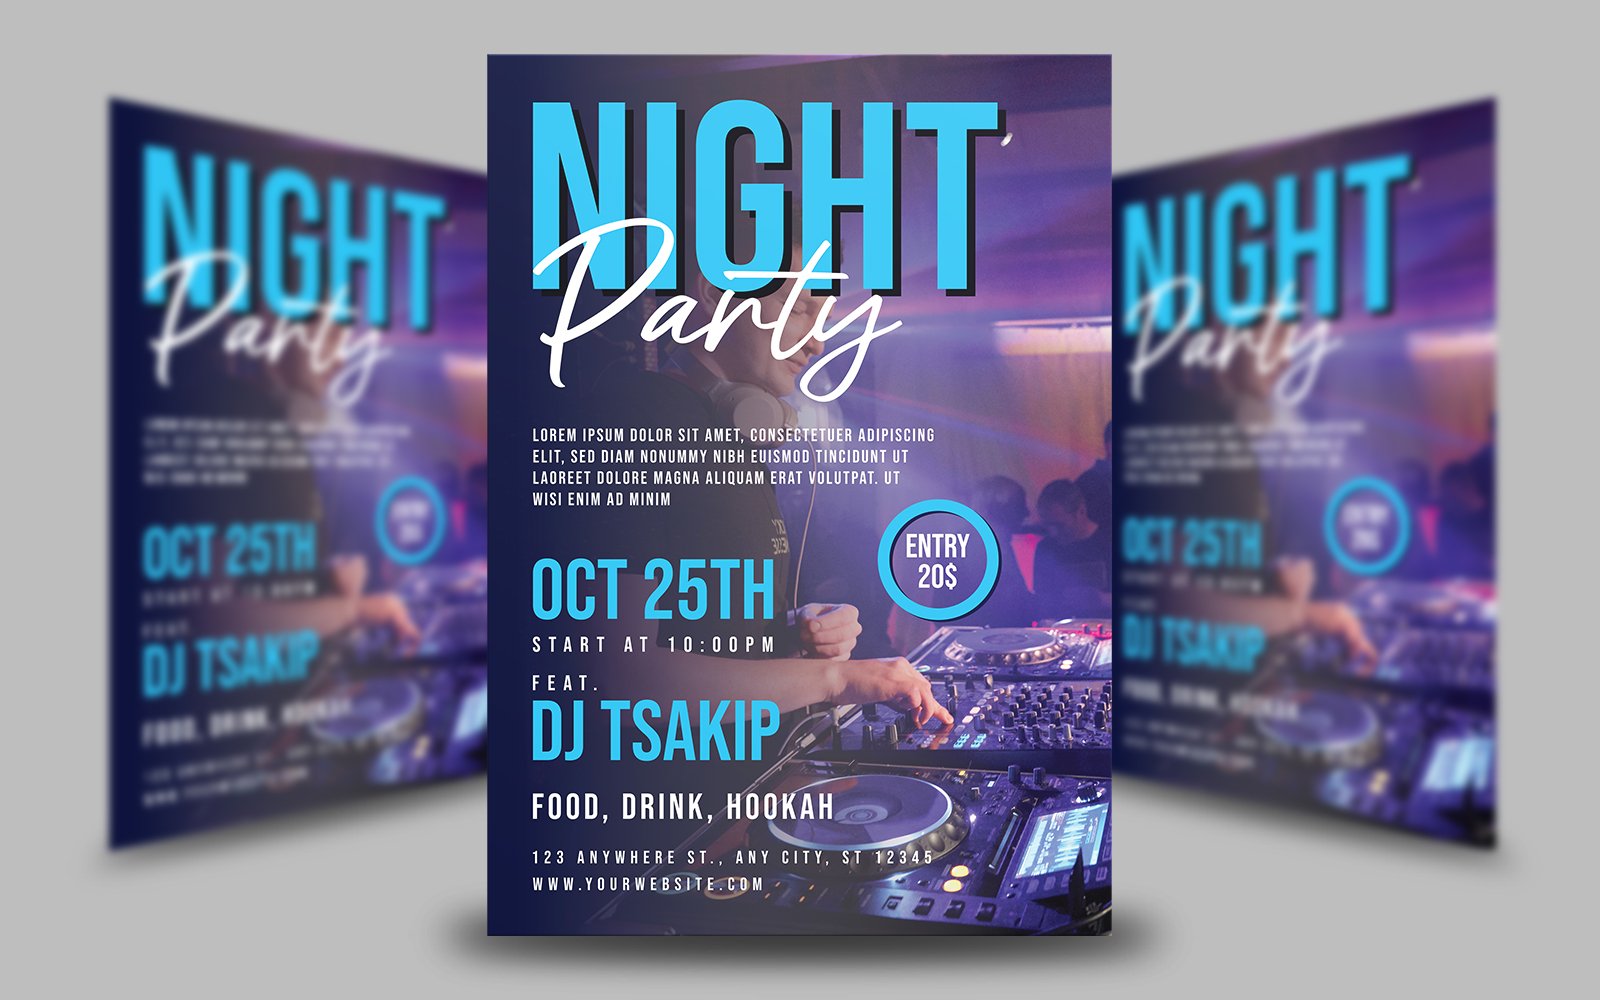 Template #349817 Event Nightclub Webdesign Template - Logo template Preview